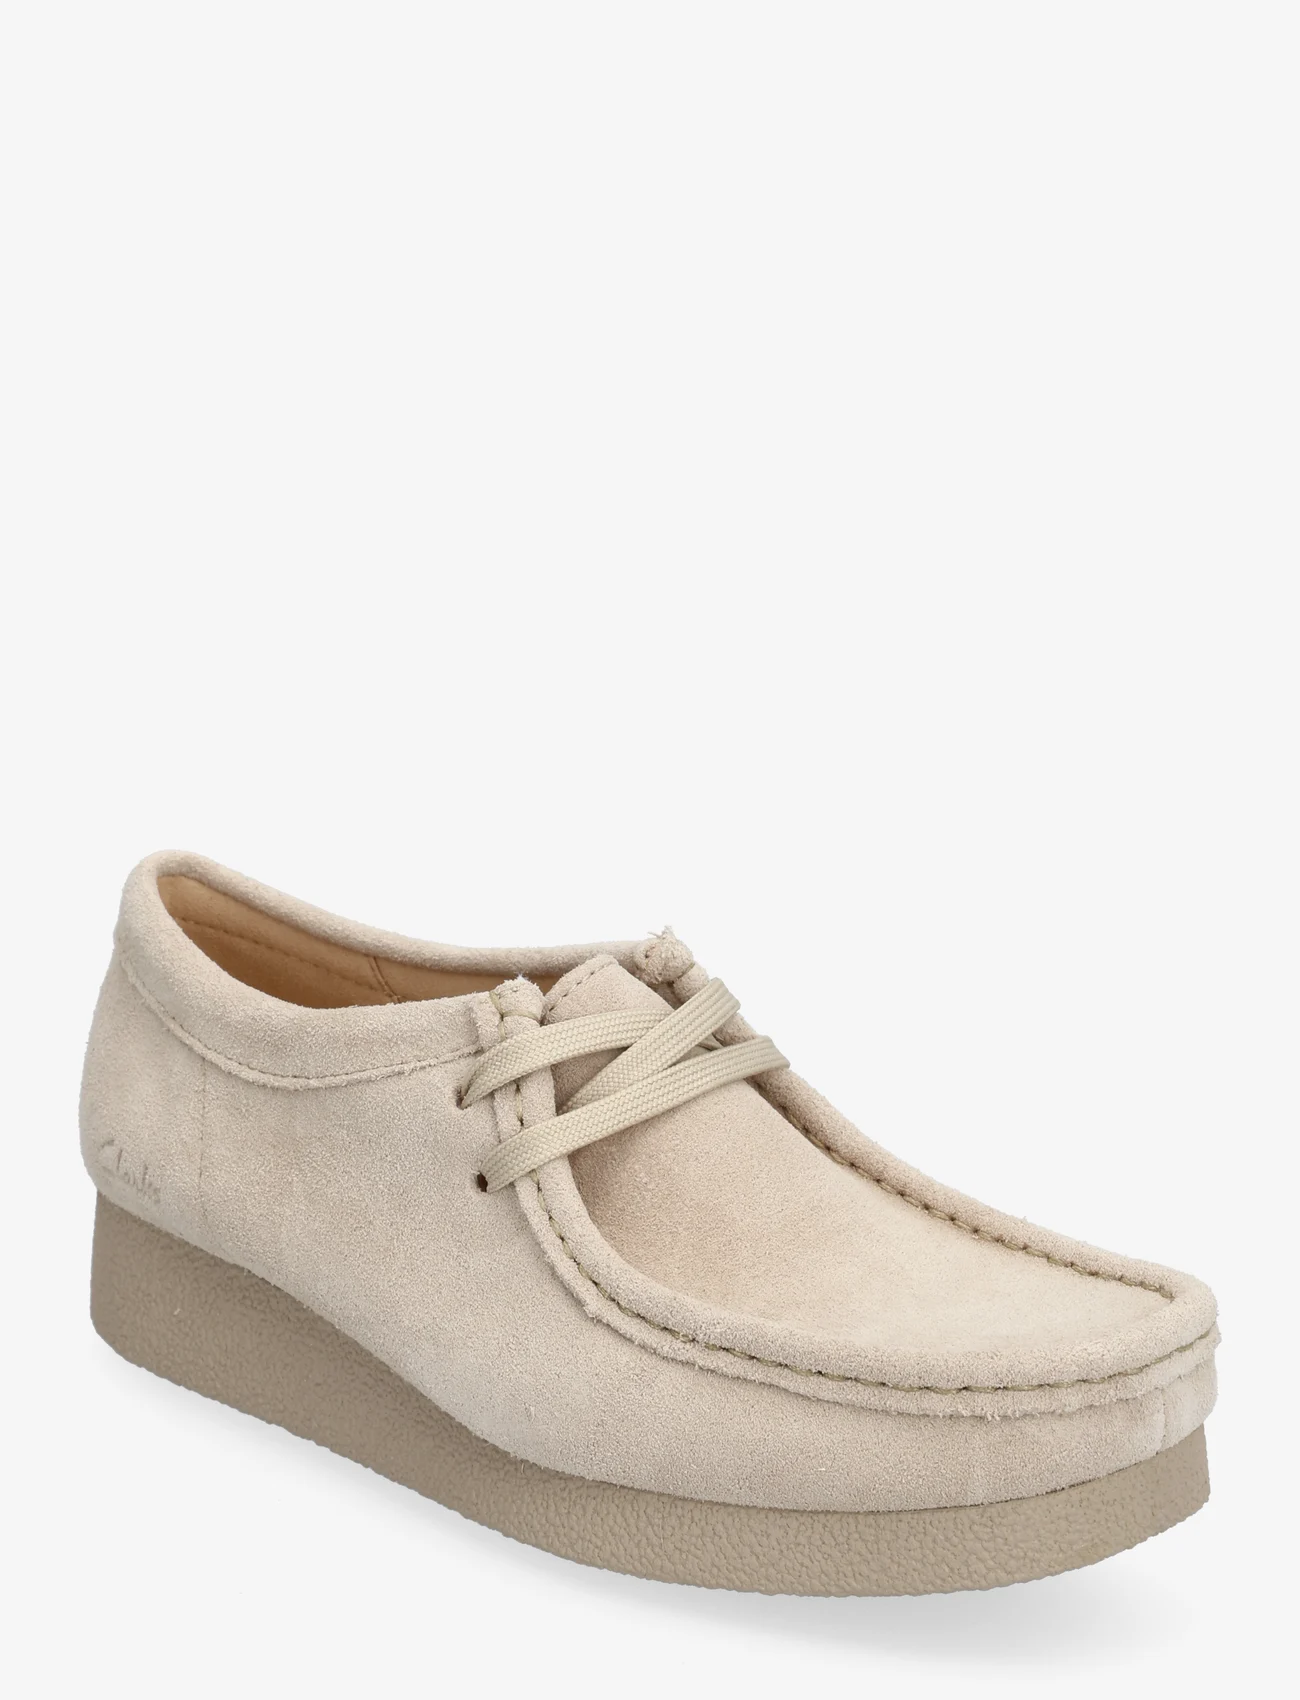 Clarks - WallabeeEVOSh D - spring shoes - 1247 sand suede - 0